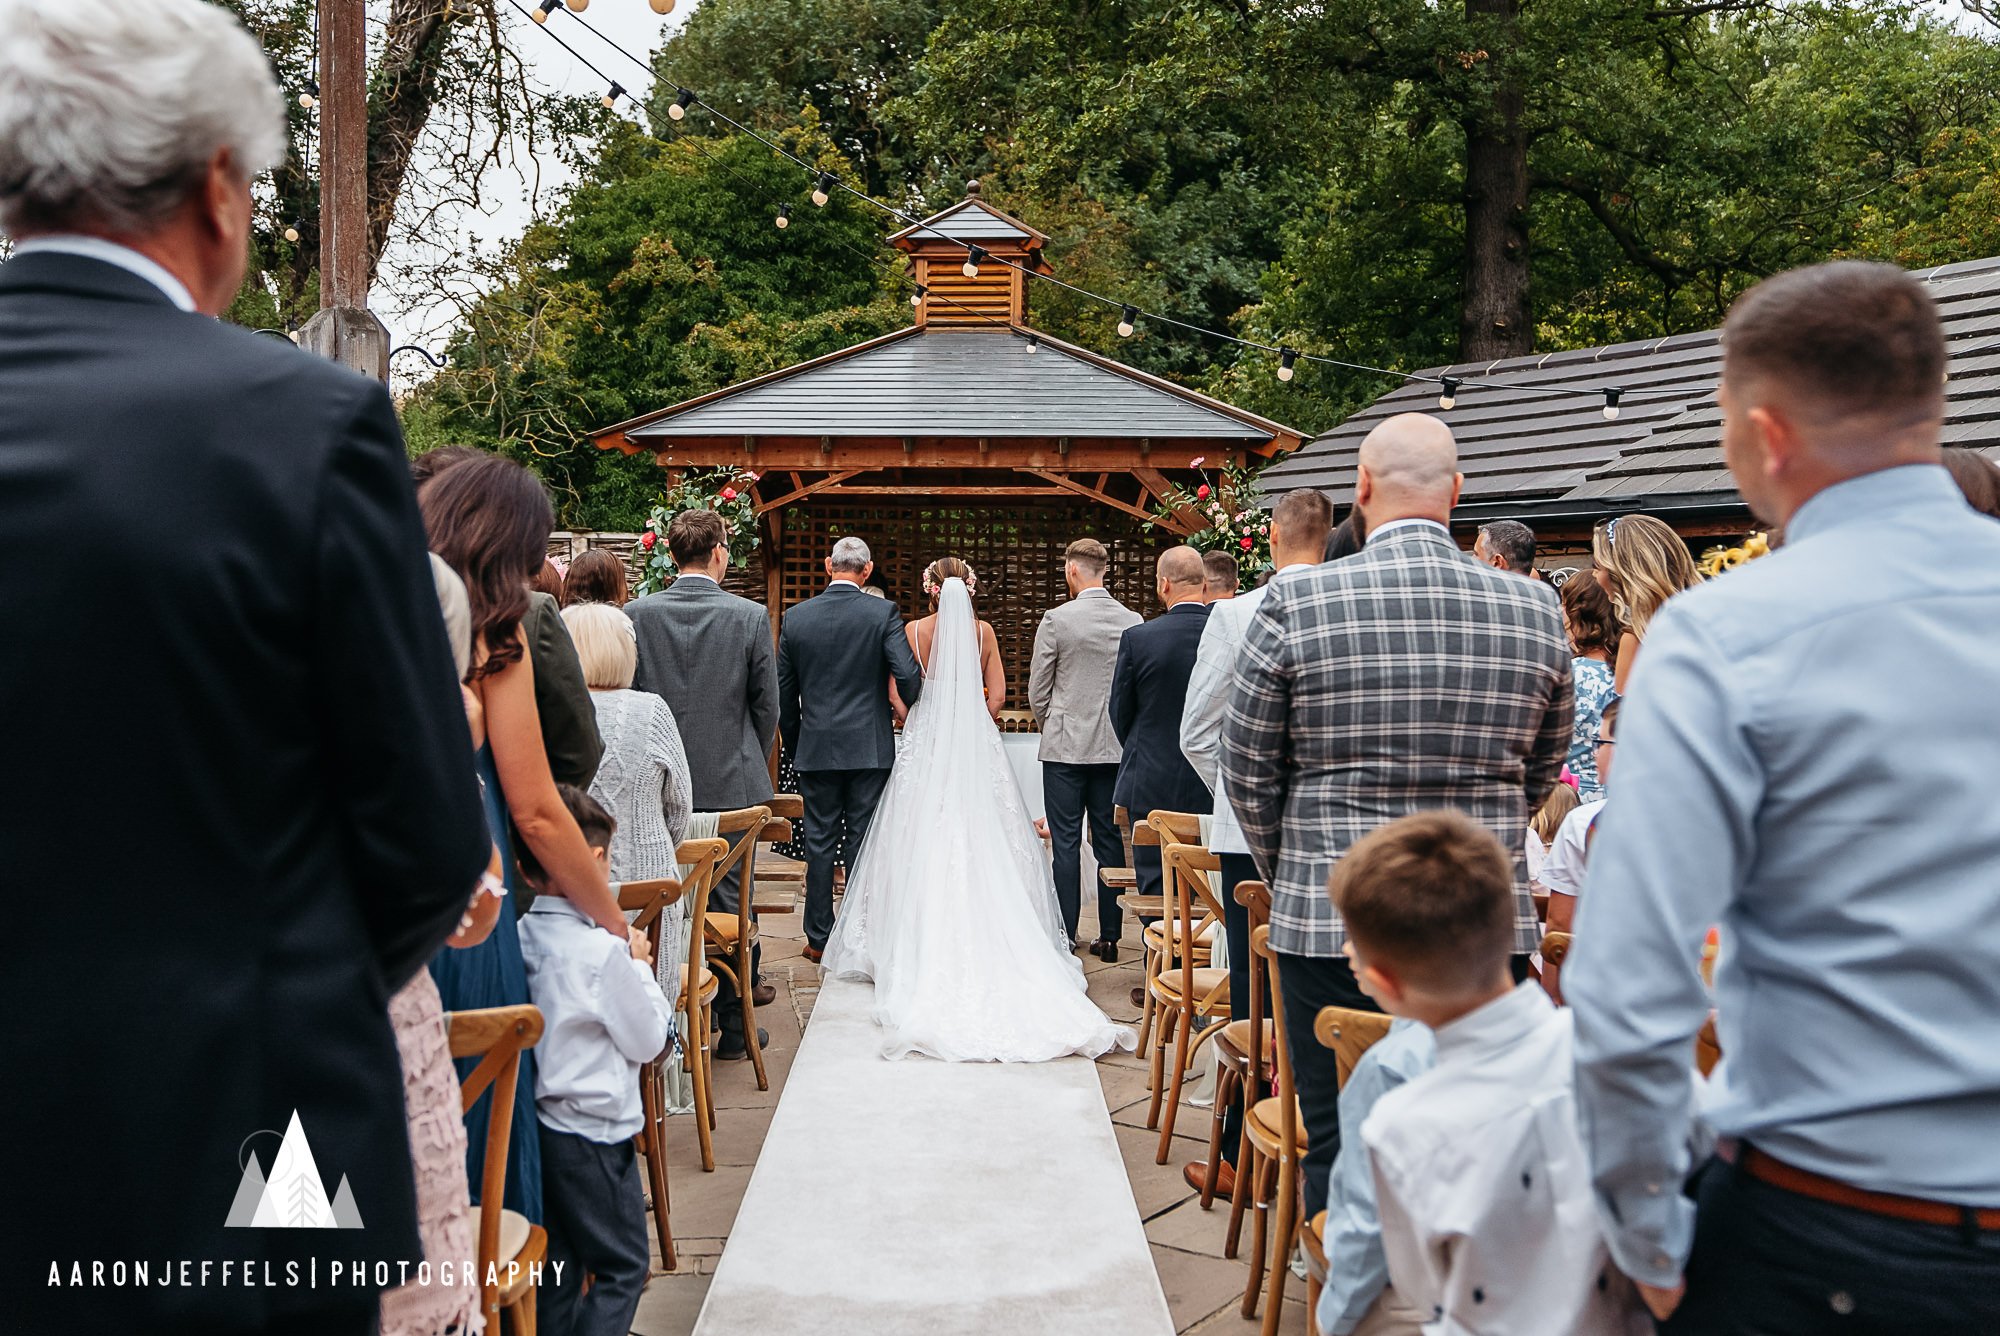 Middlesbrough wedding photographer - Whinstone View_21.JPG